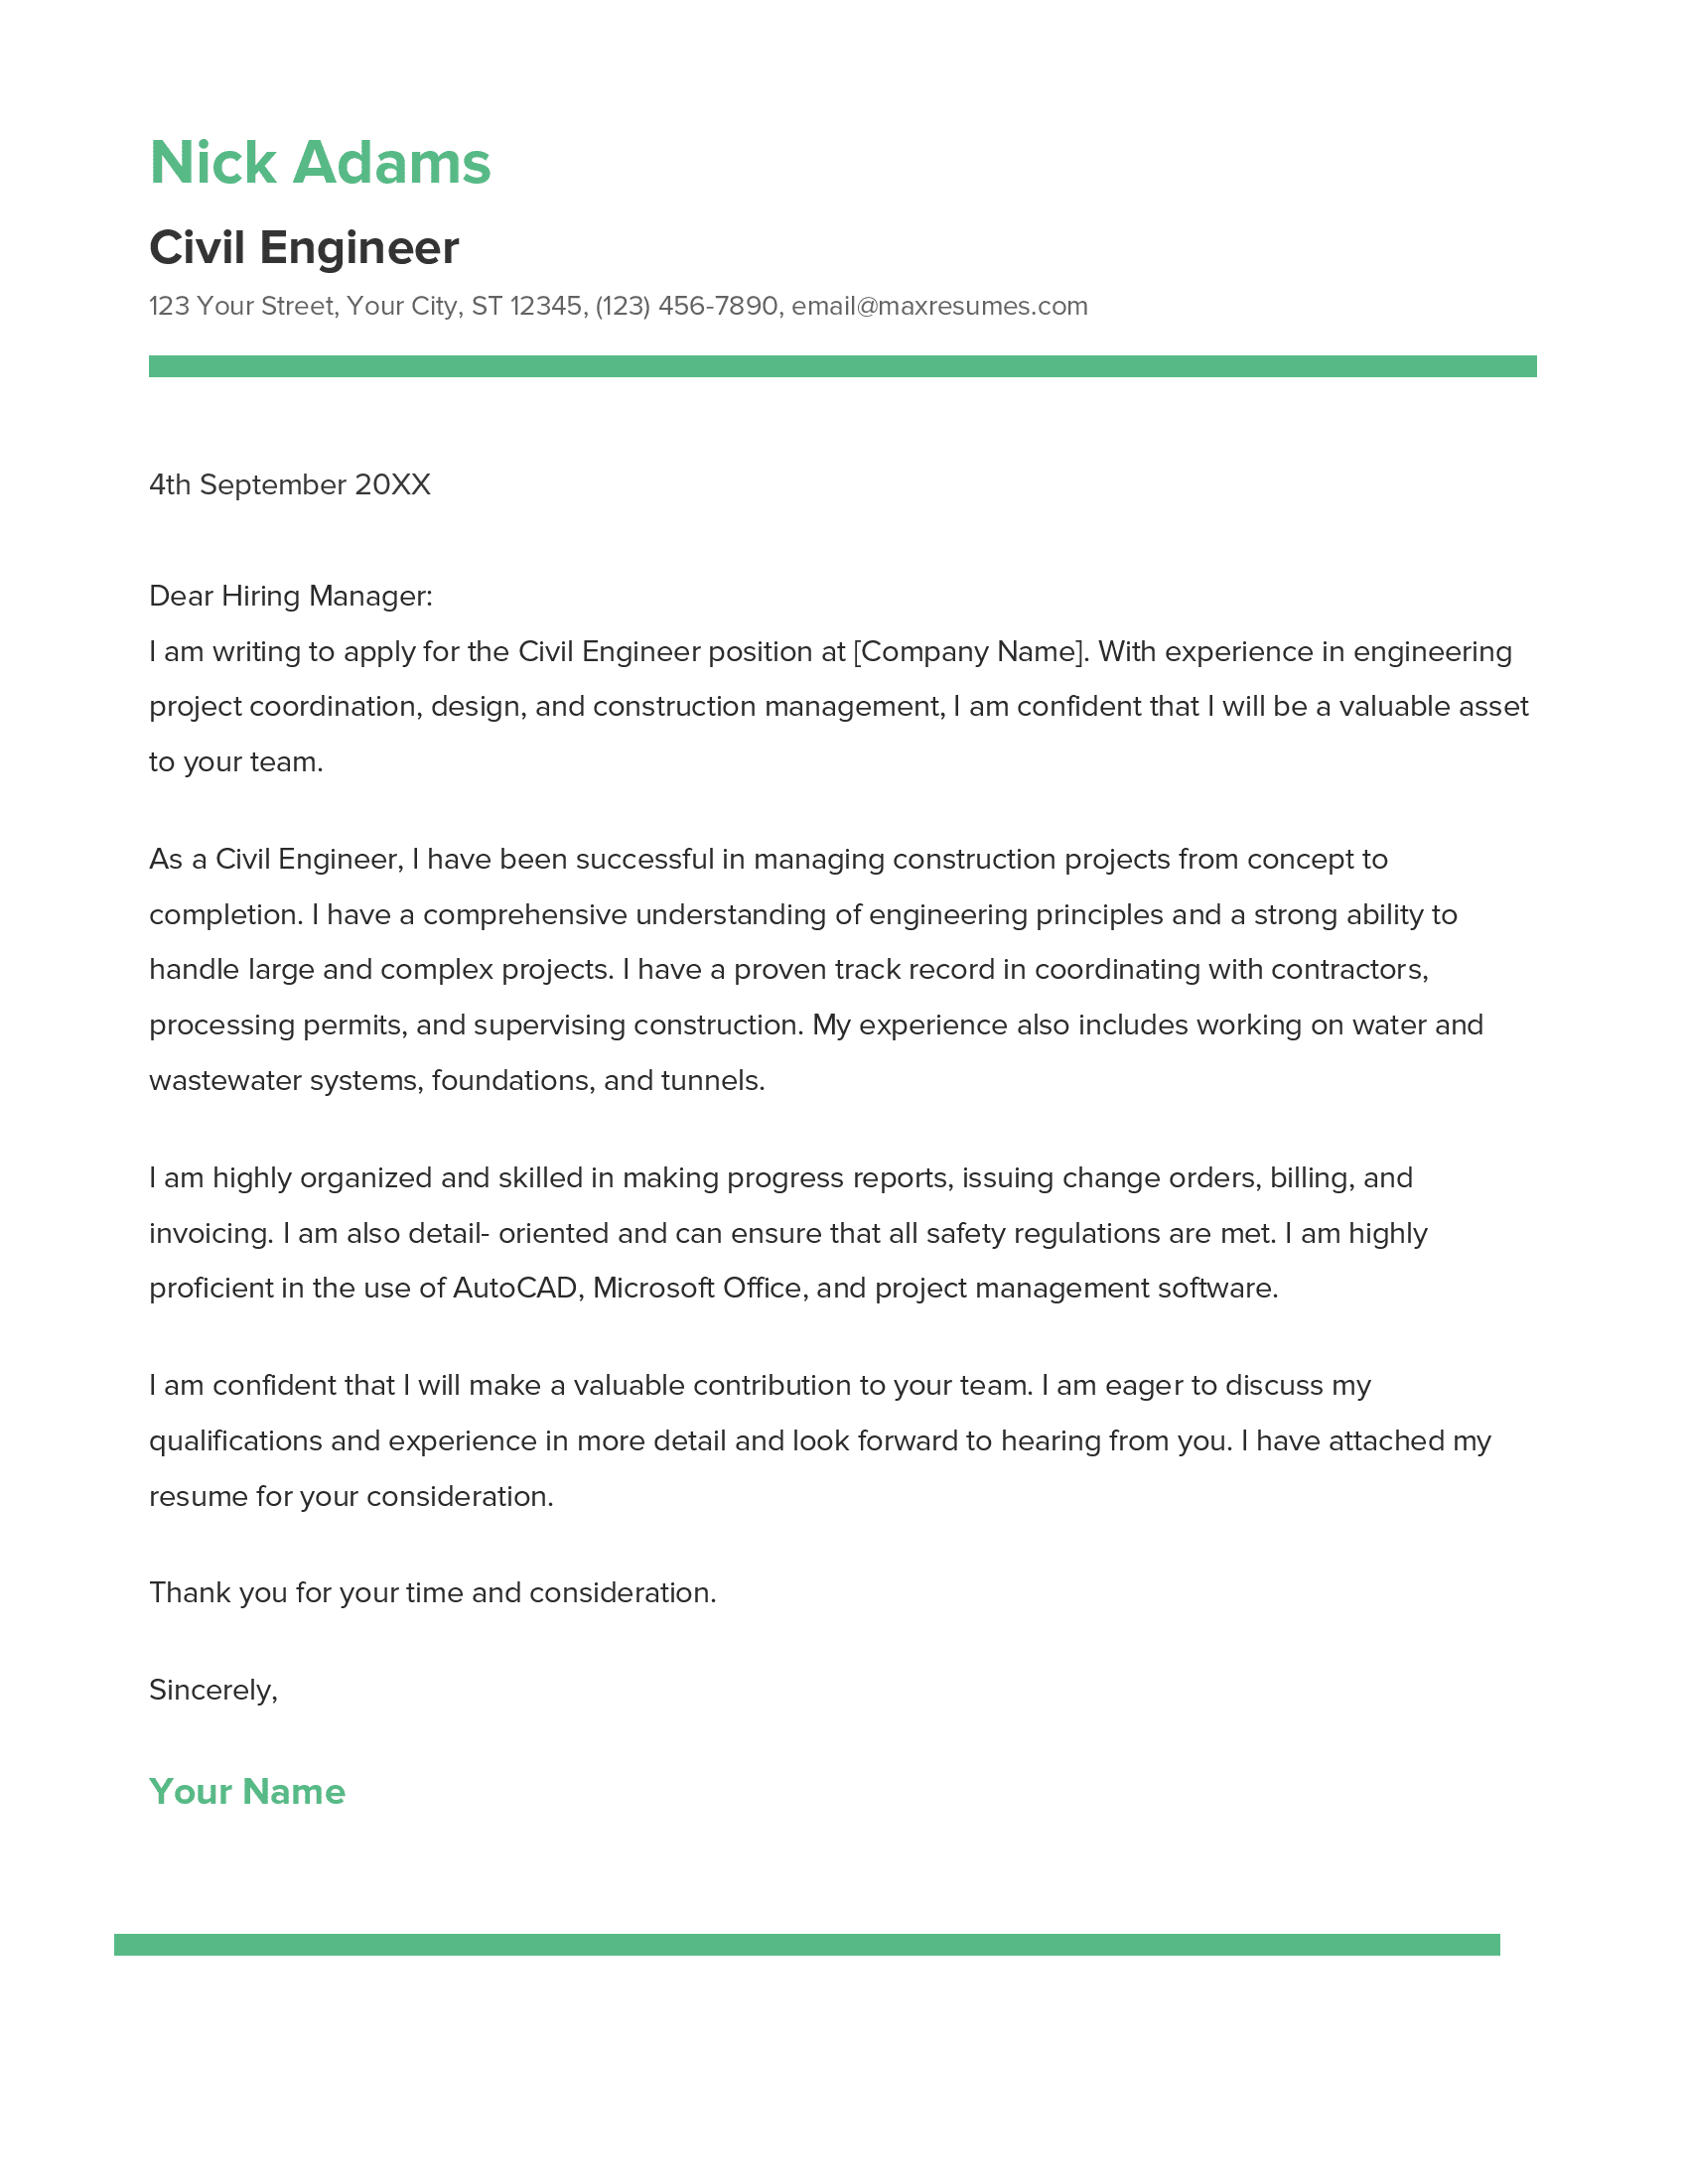 Civil Engineer Cover Letter Example